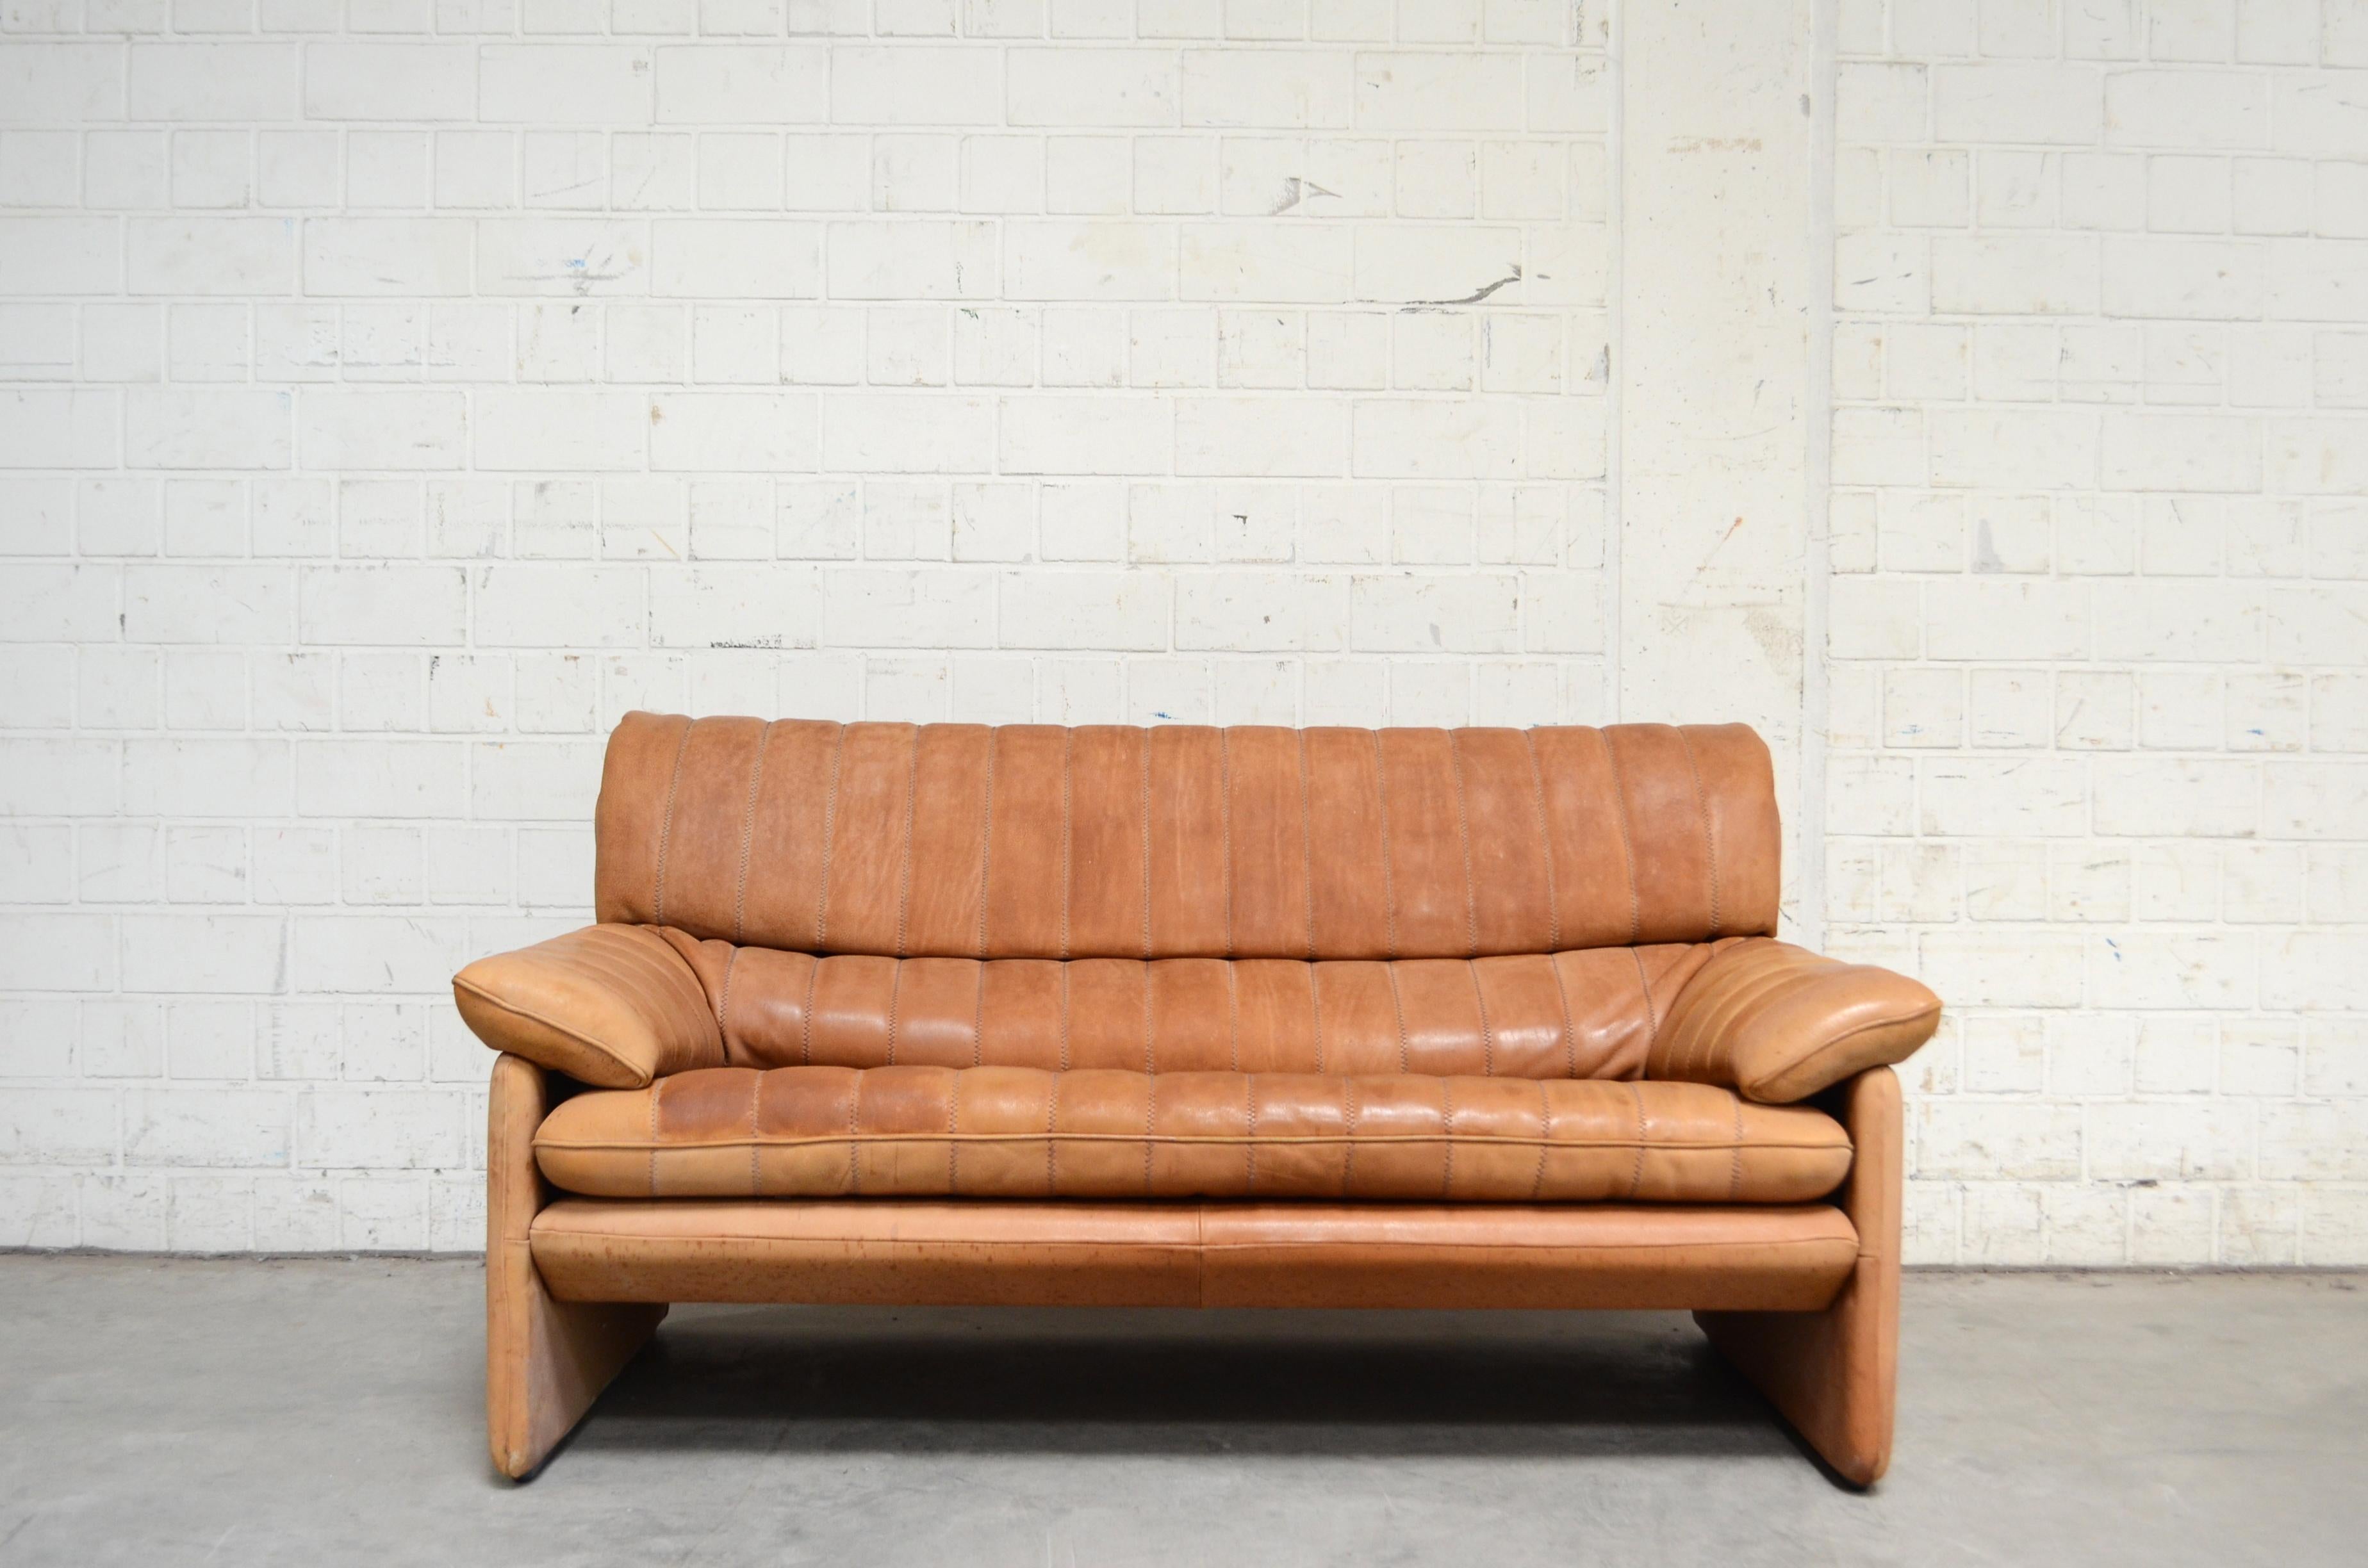 Vintage leather 2-seat sofa by De Sede.
Model Ds 86.
Thick neck leather with beautiful cognac color.
Great comfort.
With patina.
De Sede is a Switzerland furniture company that creates leather furniture with premium quality.
We also have a